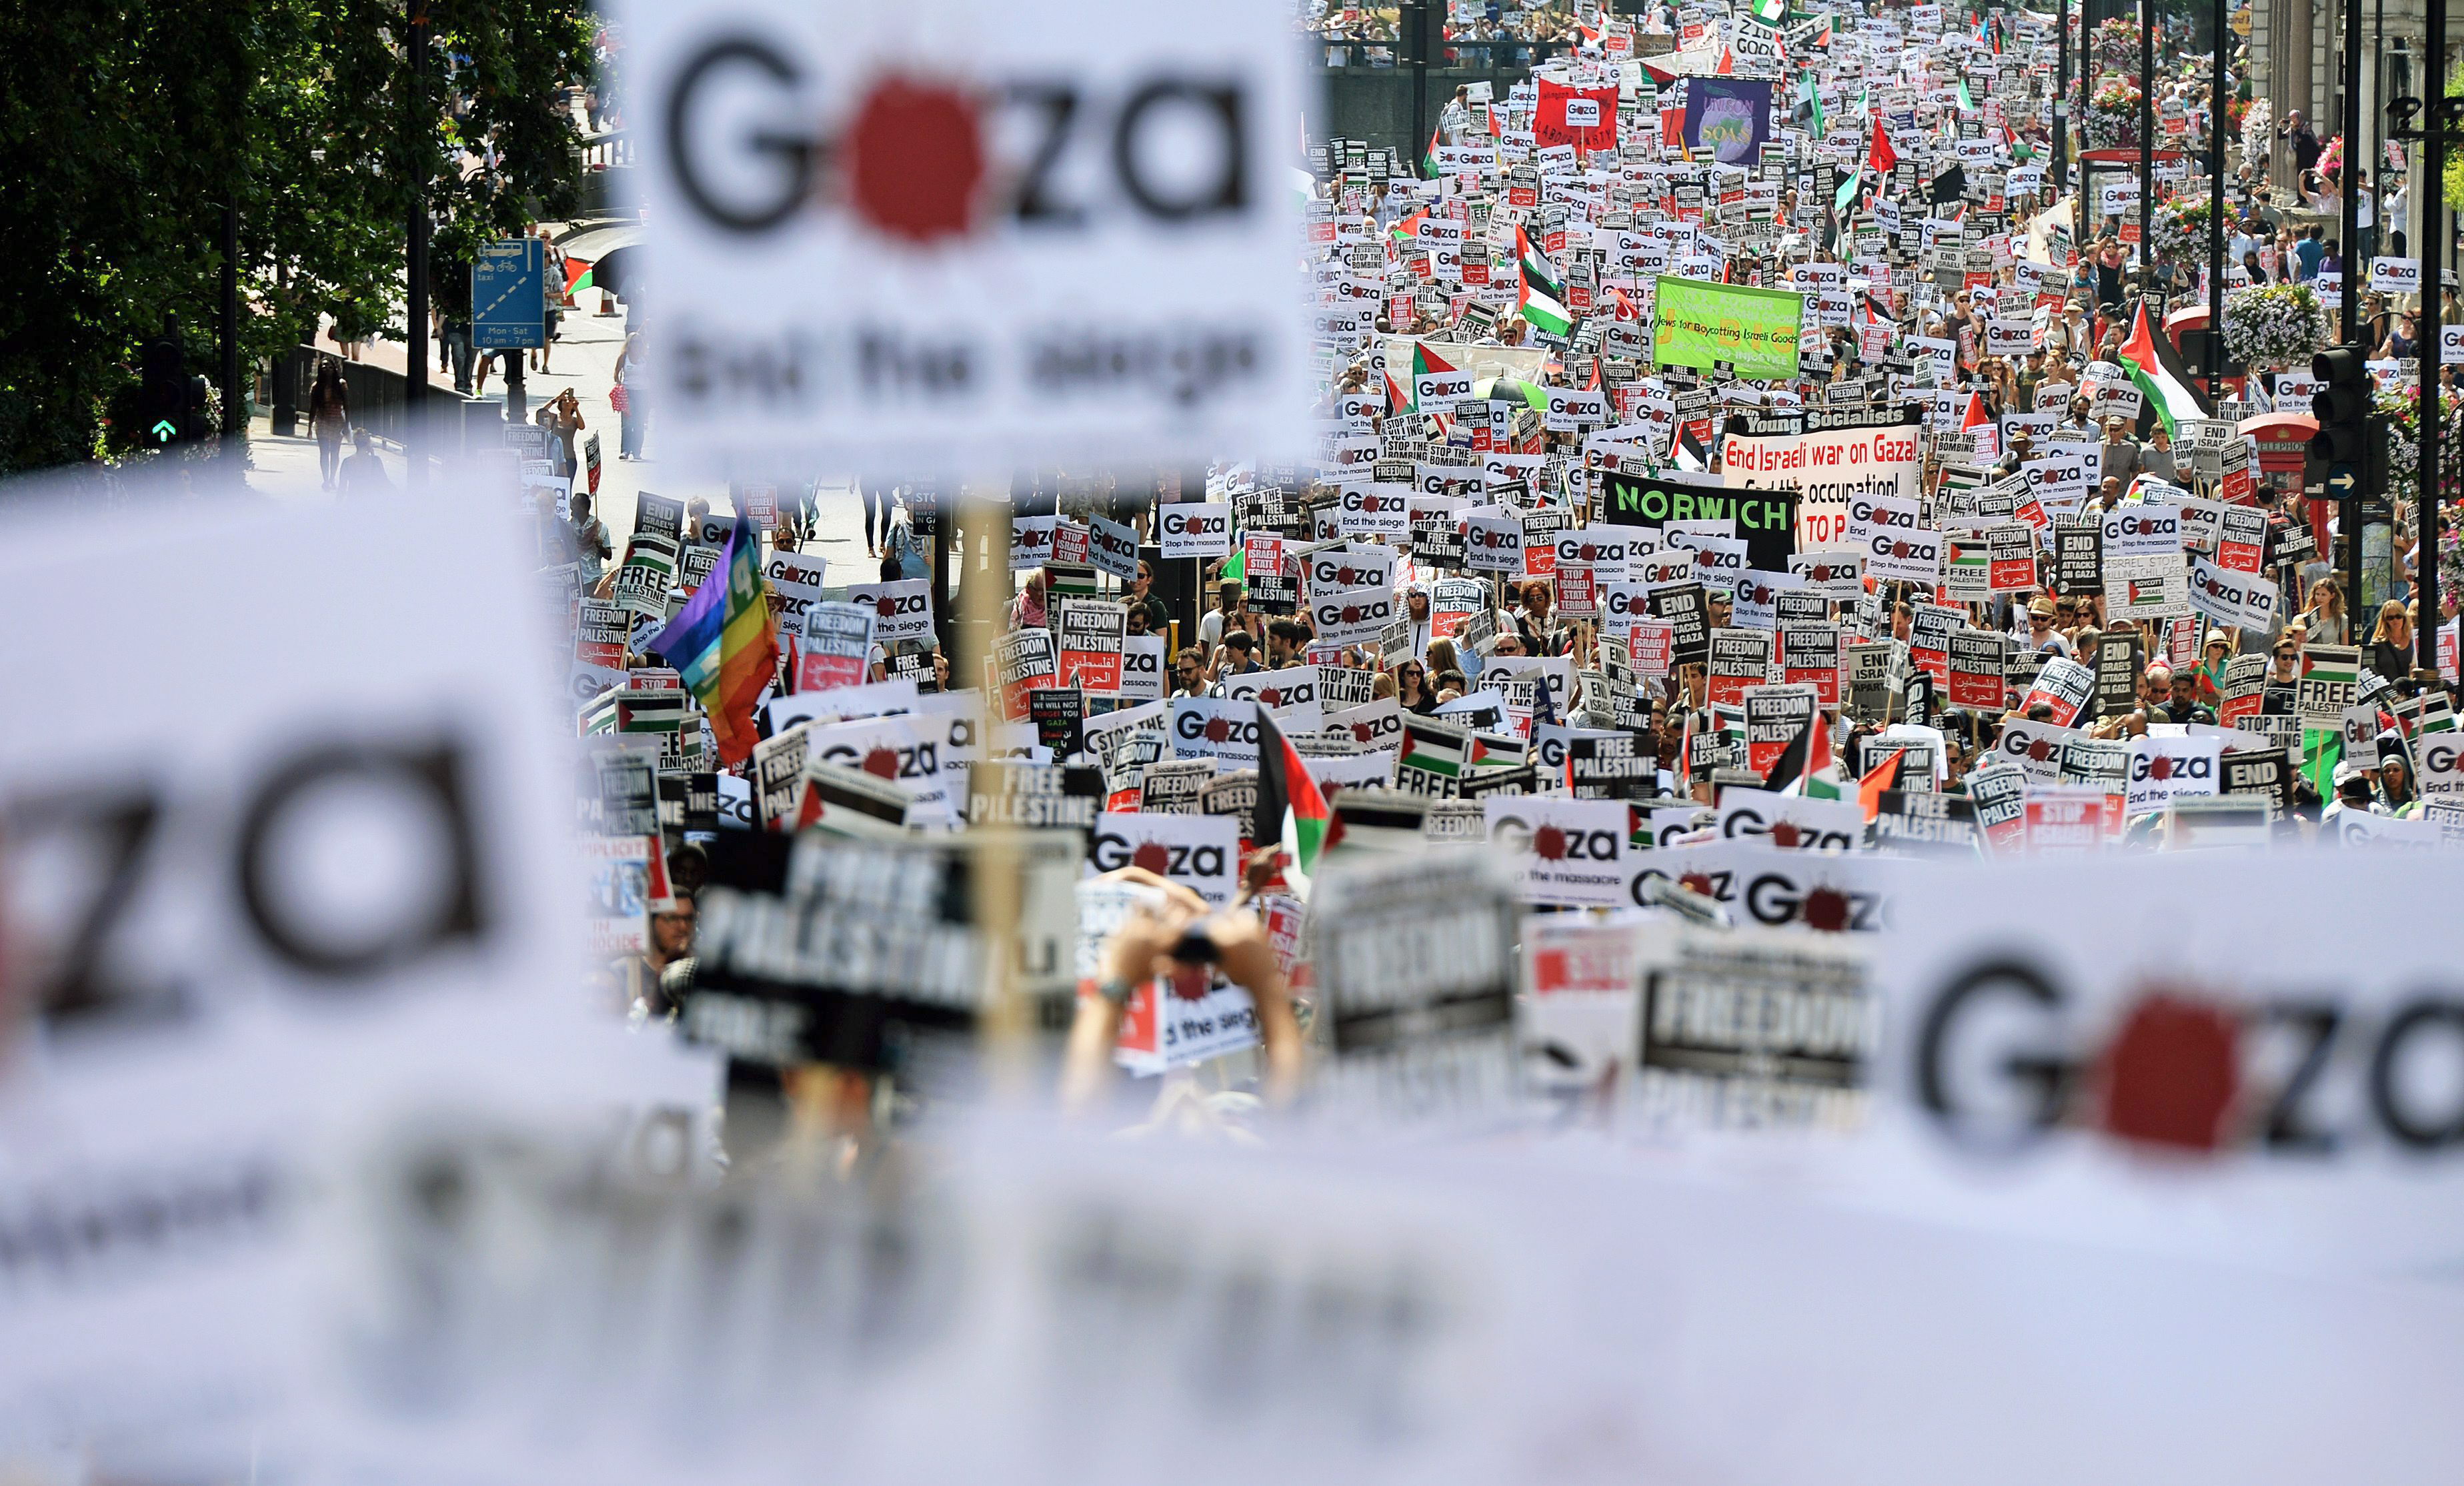 Protests in London against violence in Gaza